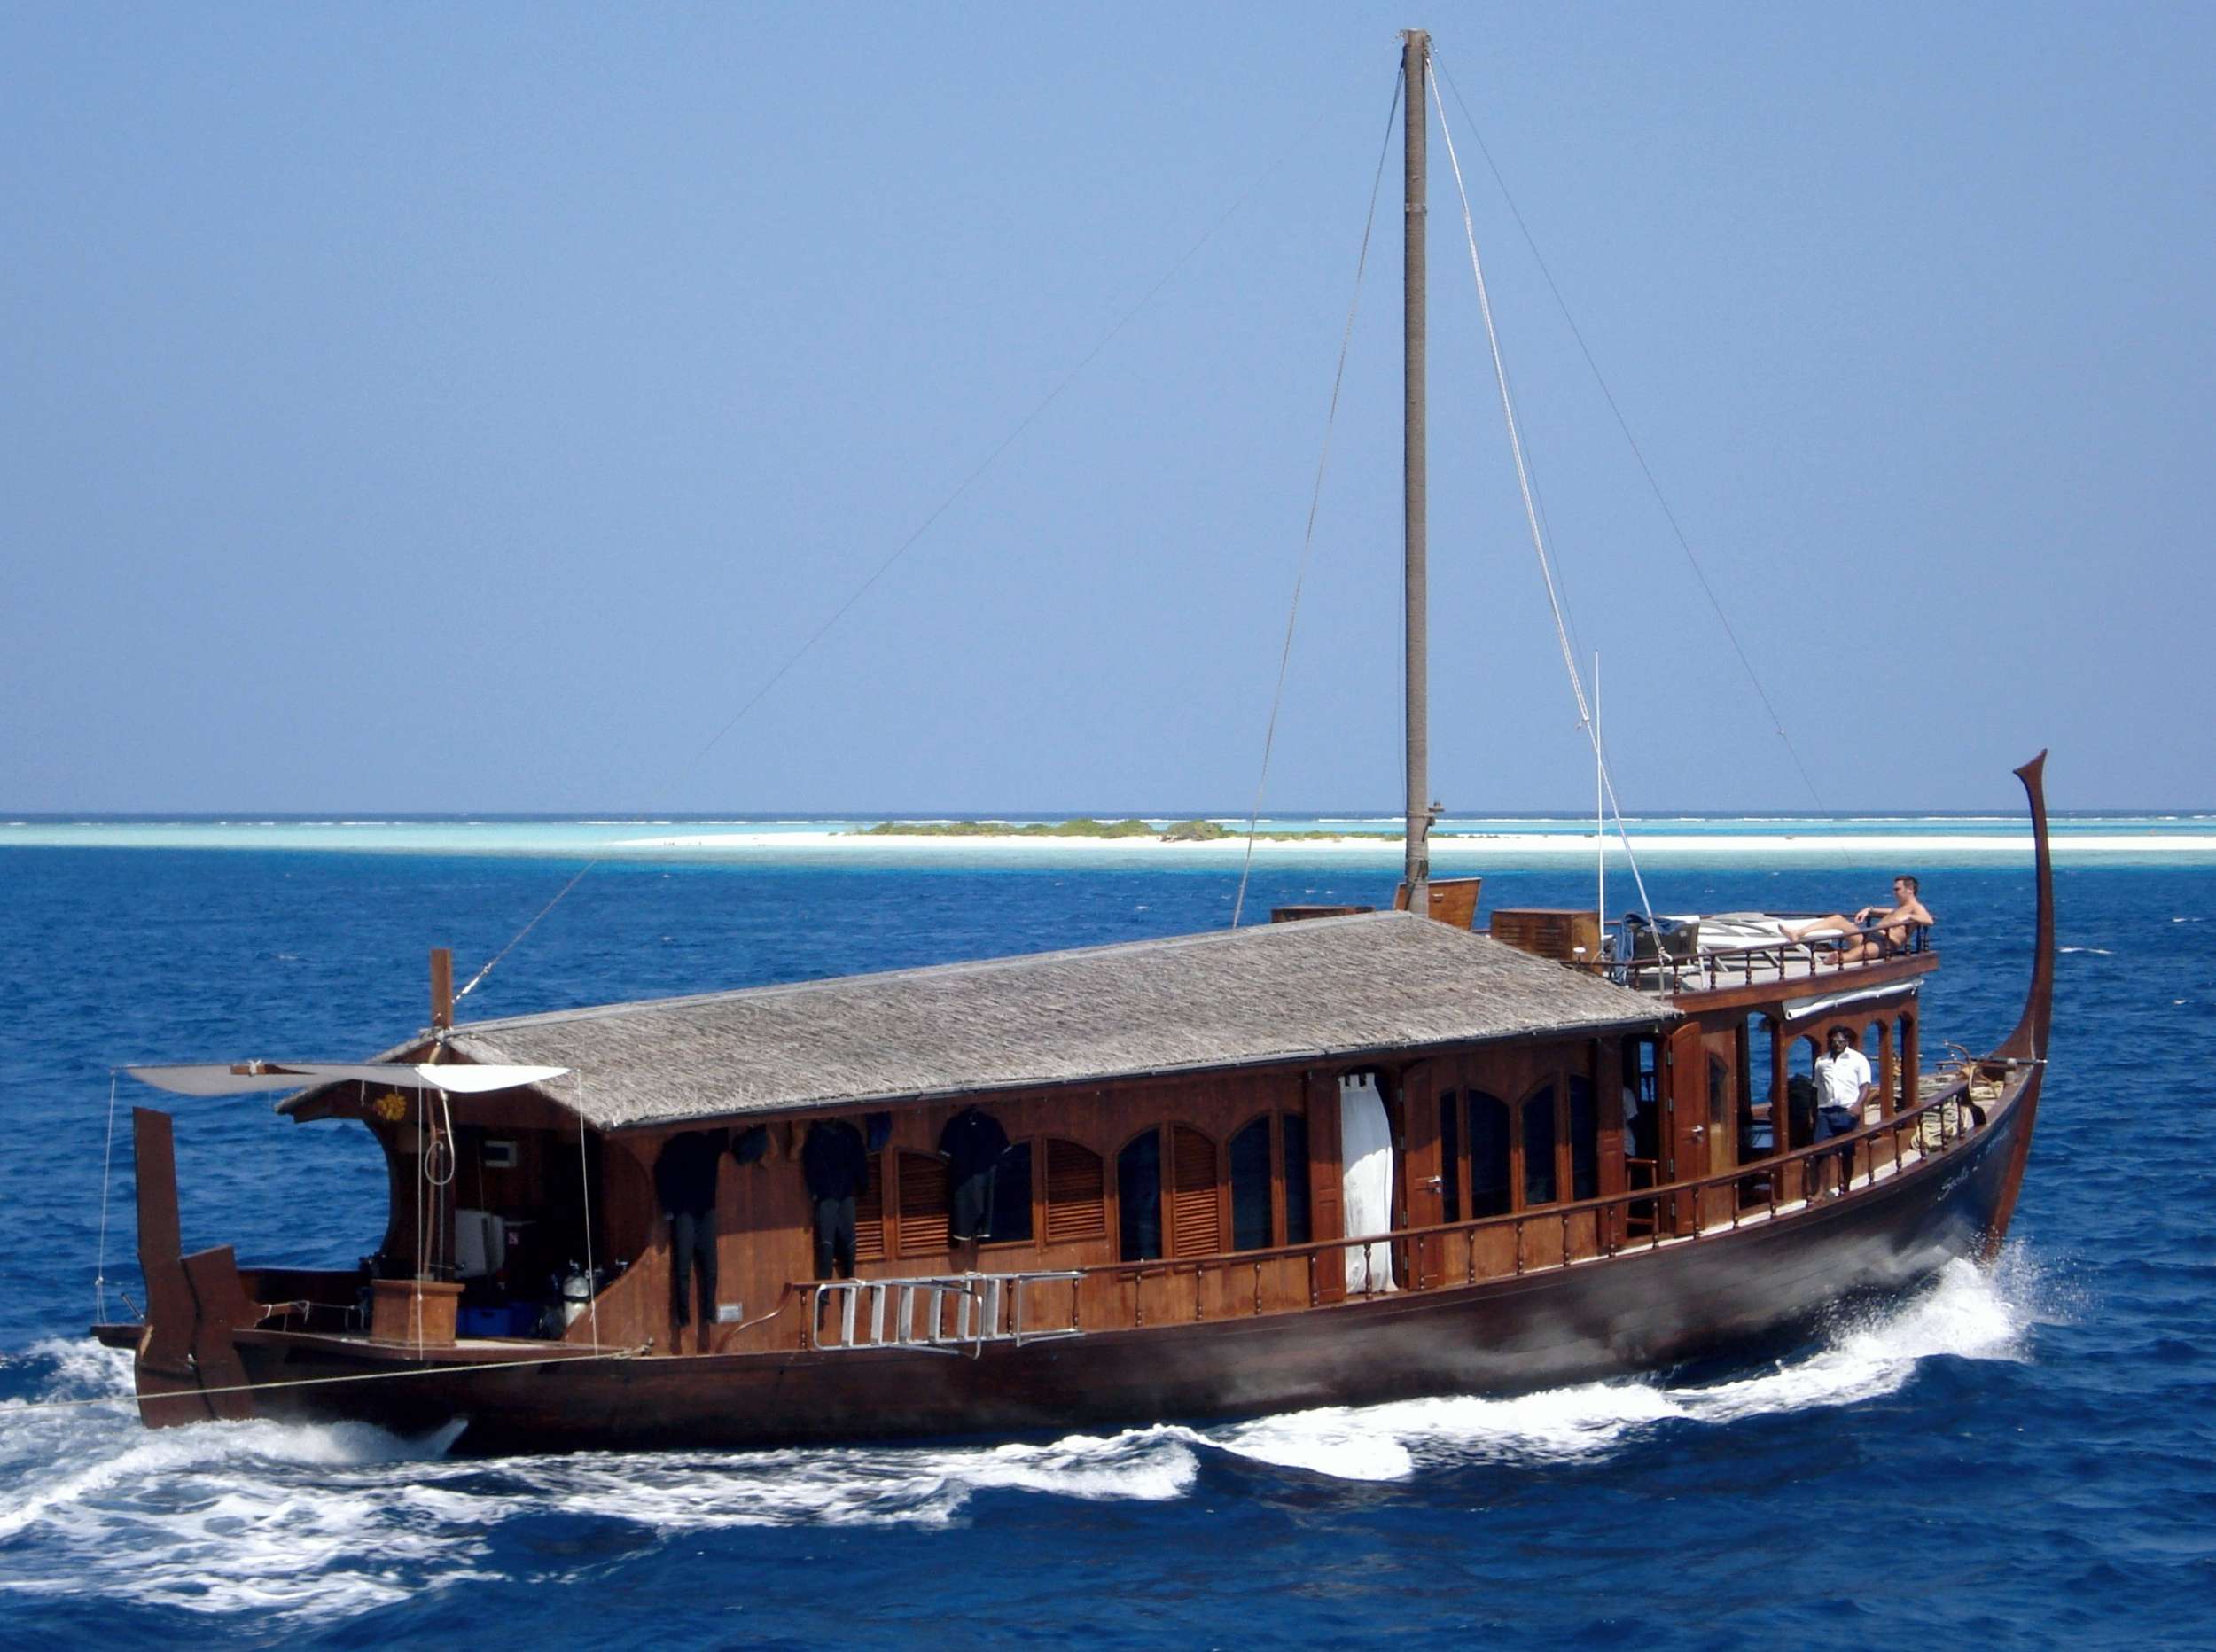 DHONI STELLA 2 - Luxury yacht charter Maldives & Boat hire in Indian Ocean & SE Asia 1